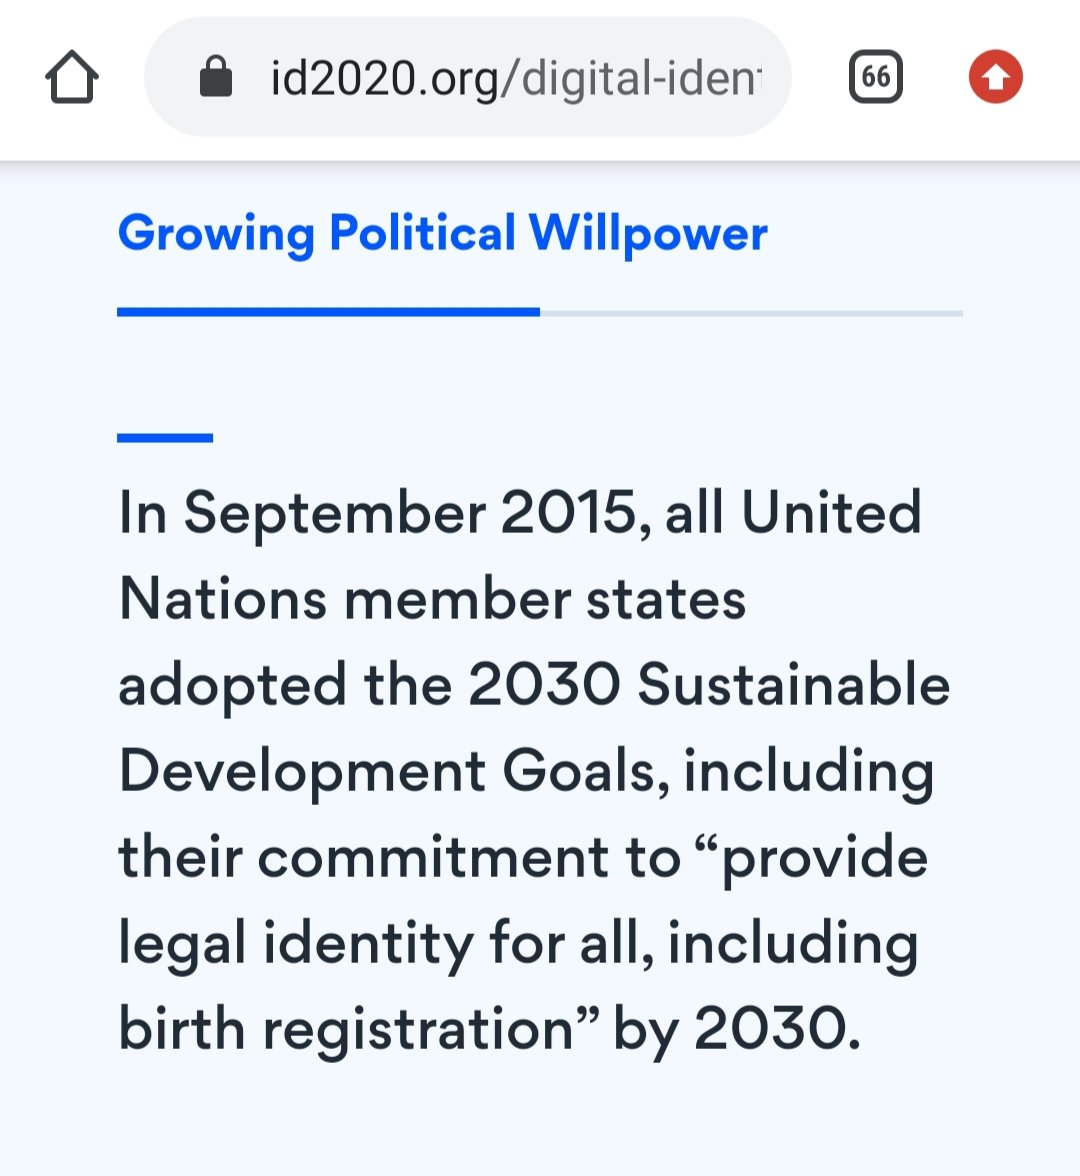 207) ID2020 is working towards fulfilling the UN's SDG's as well.